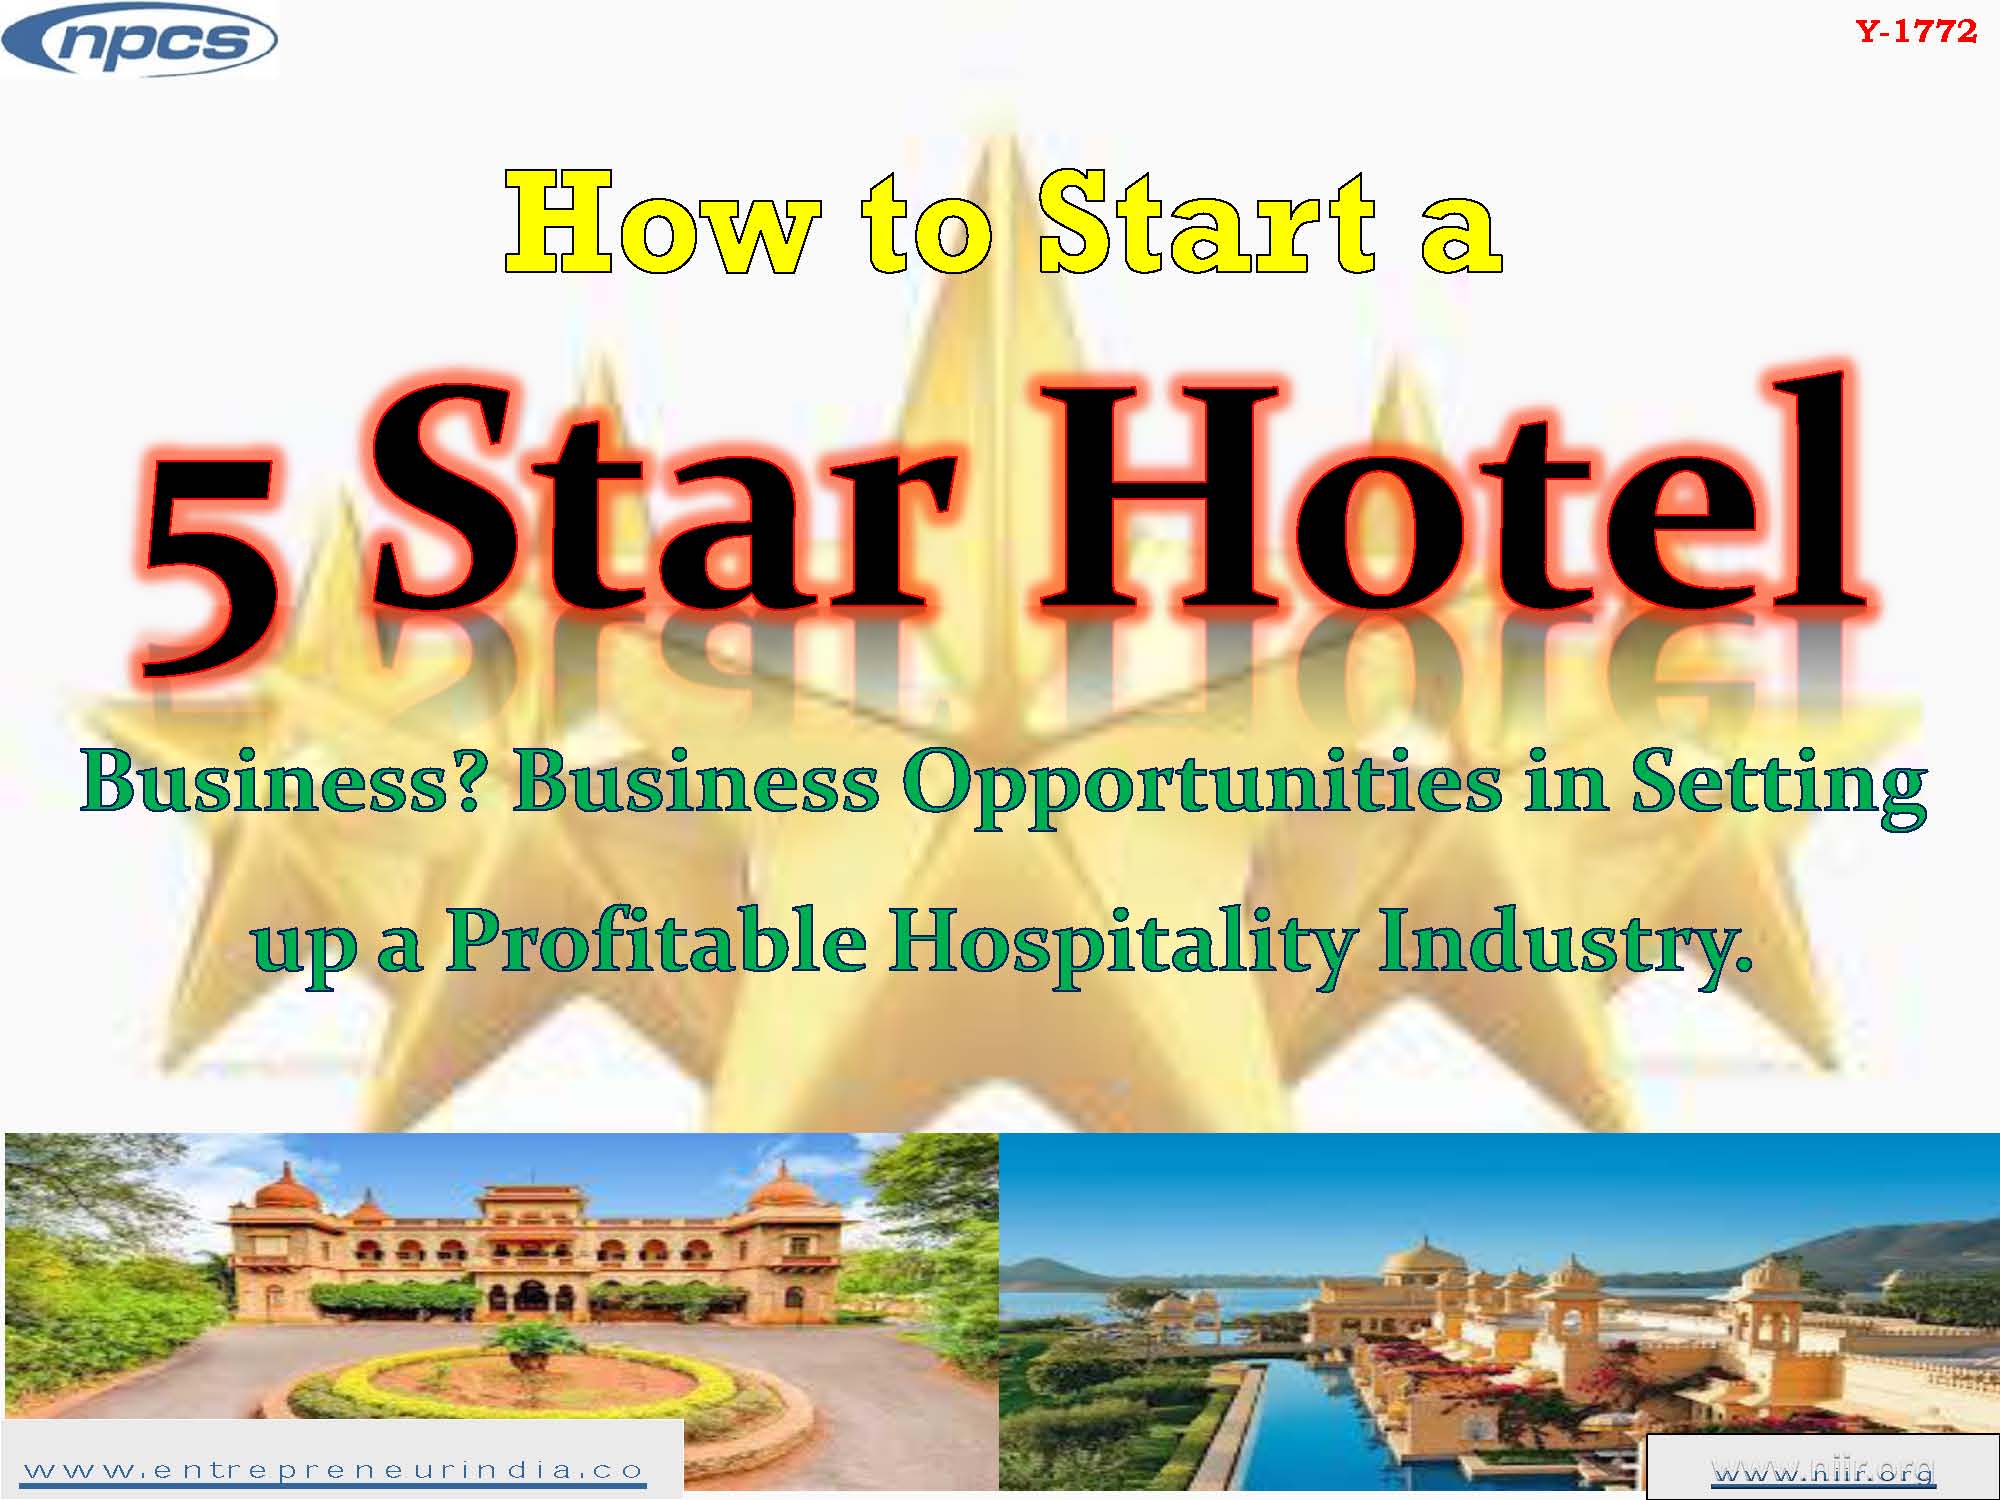 How to Start a 5 Star Hotel Business Business Opportunities in Setting up a Profitable Hospitality Industry